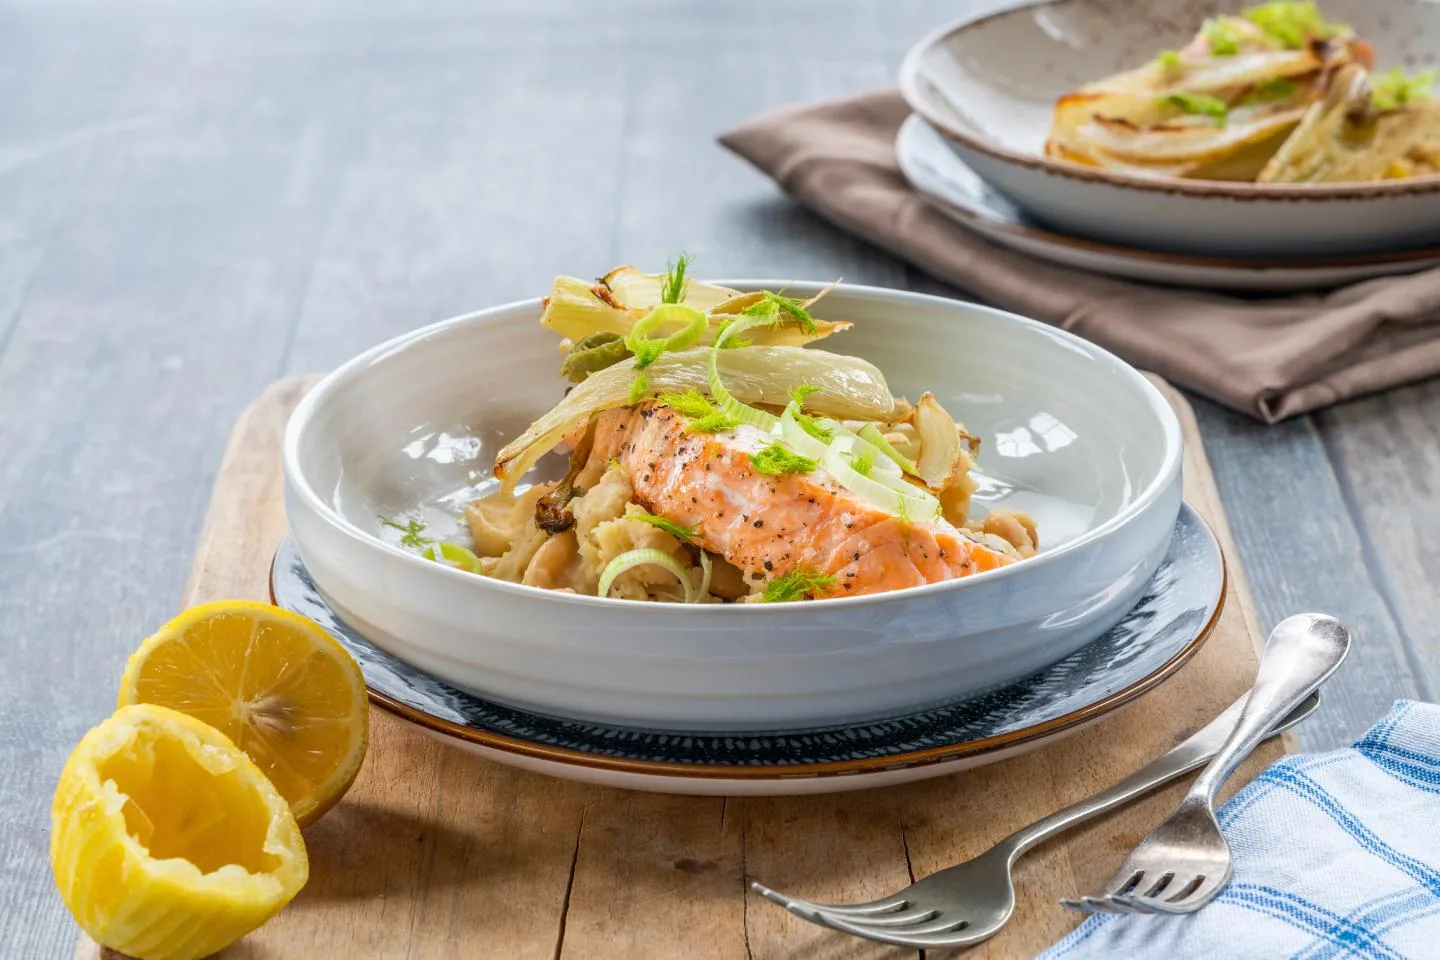 Mediterranean Salmon Provencais not only packed with flavor but also loaded with health benefits.